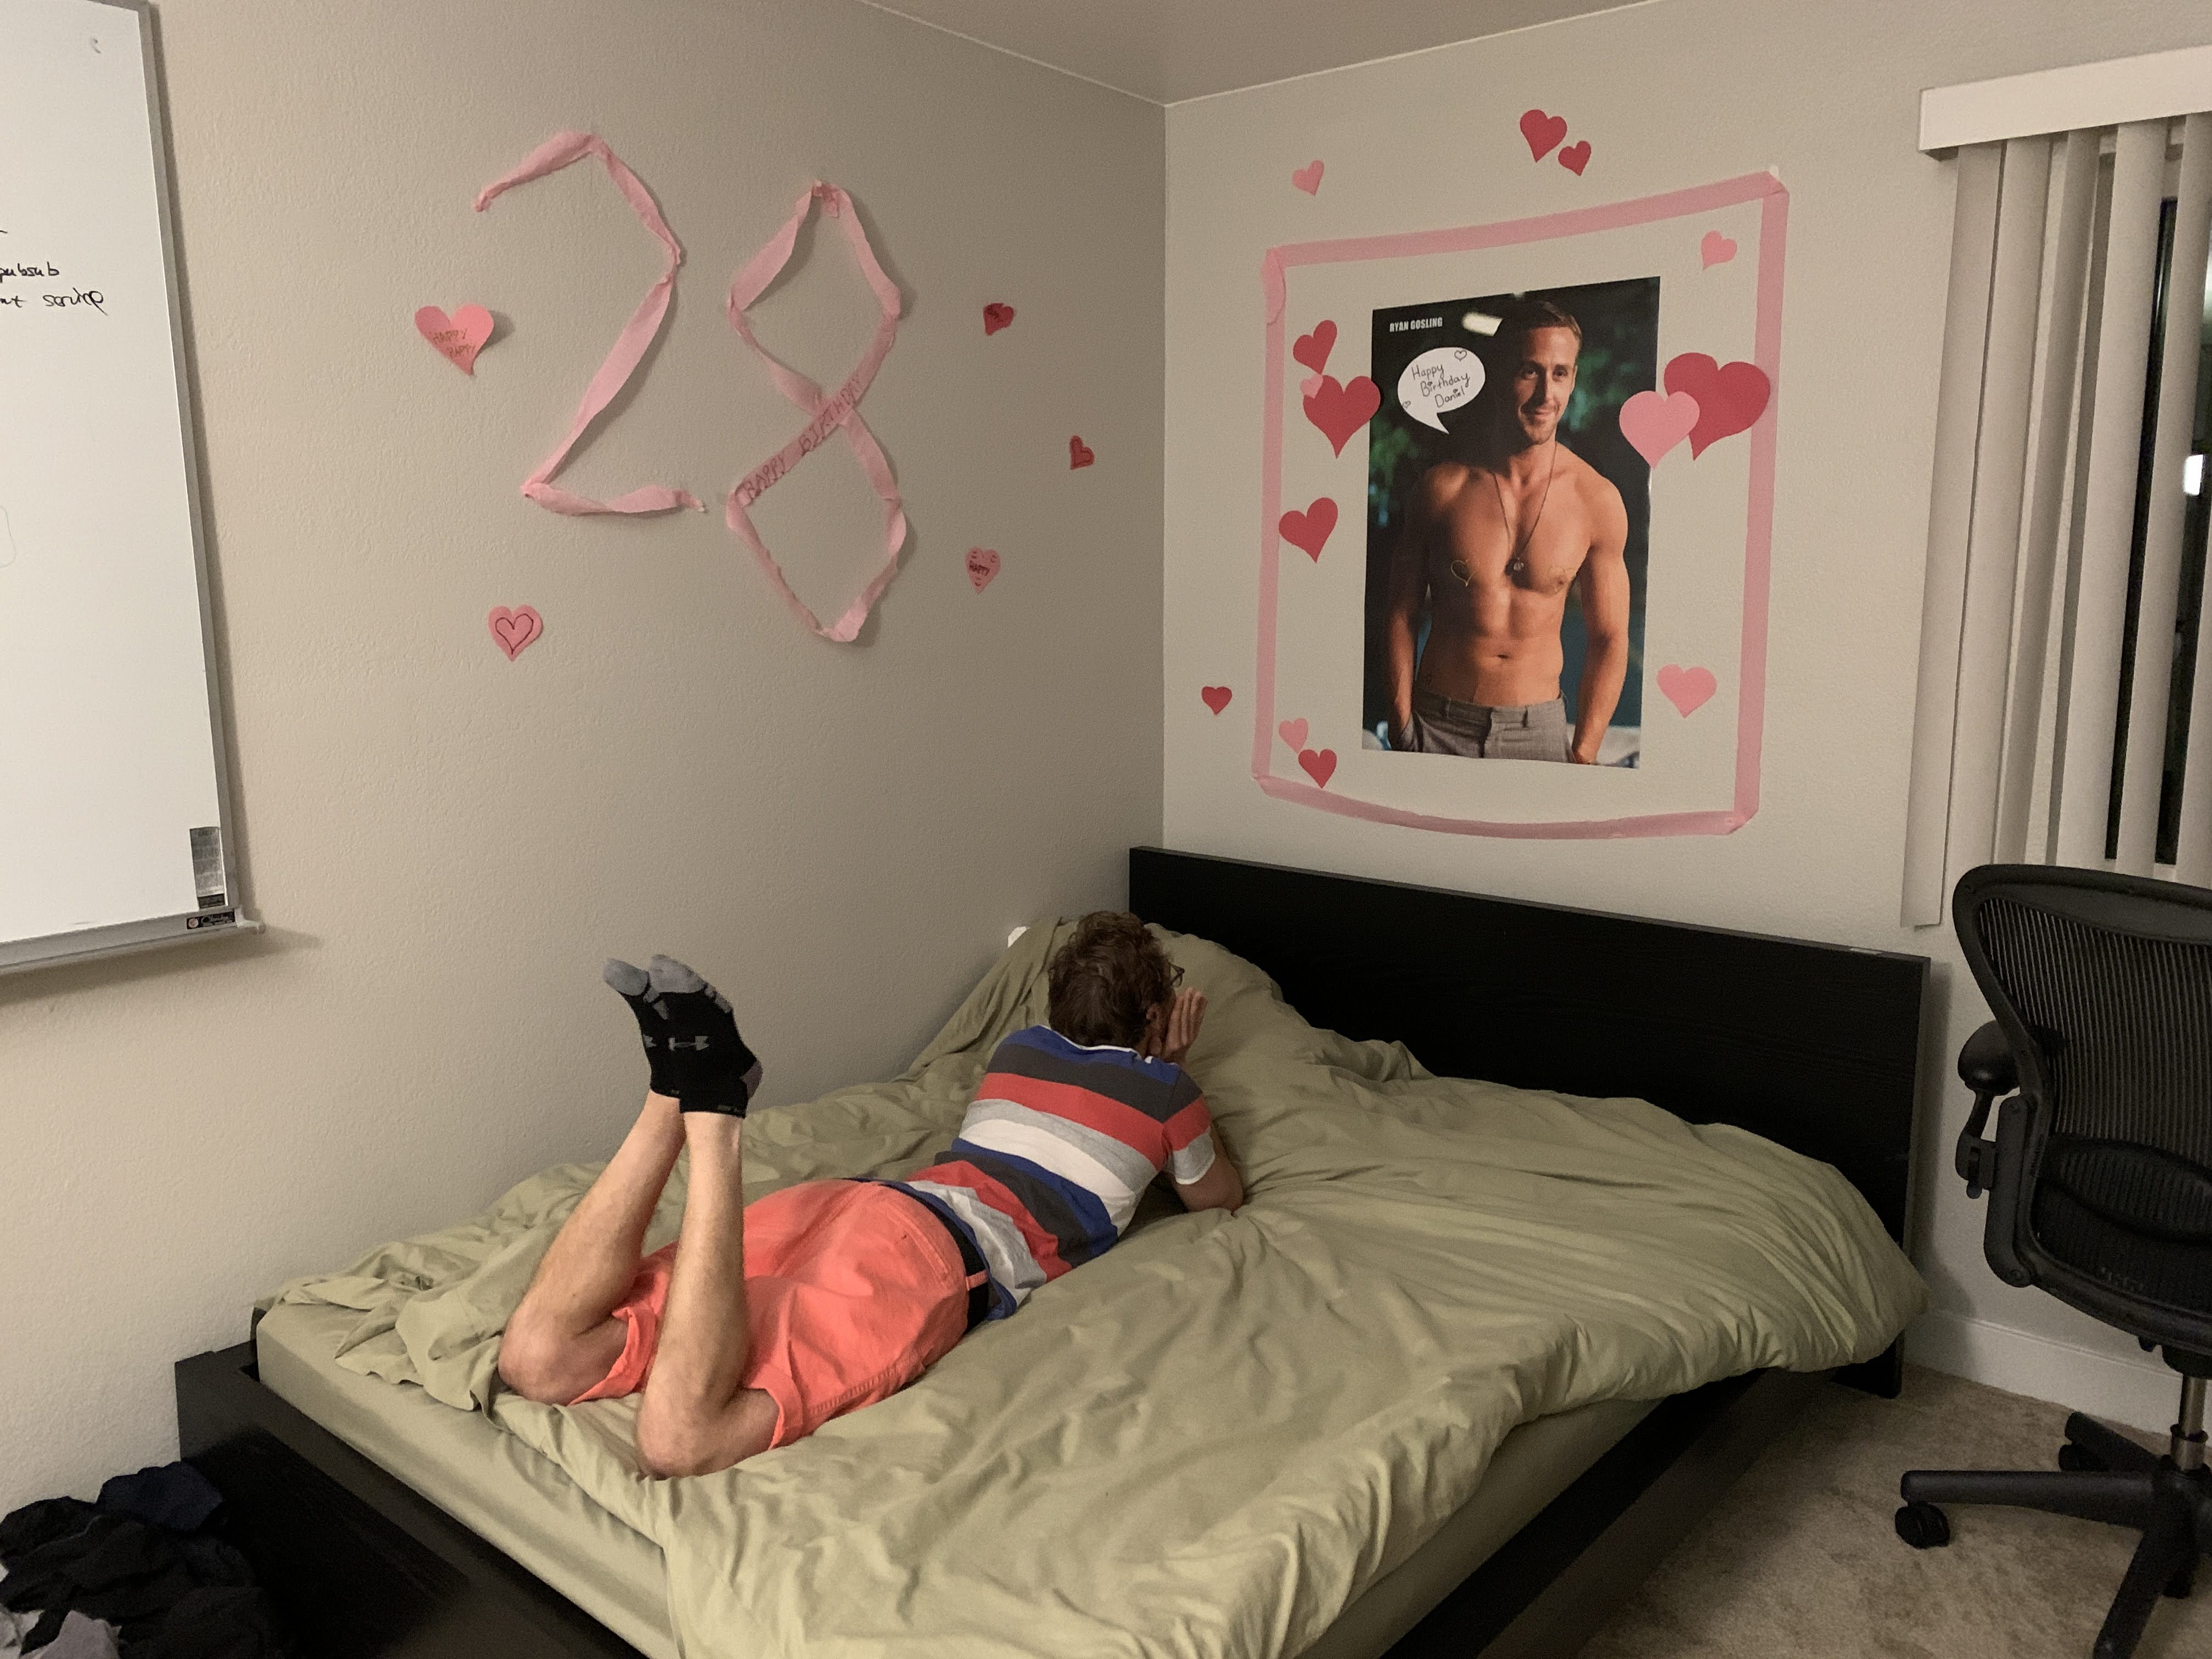 28 - Getting a Ryan Gosling poster as a birthday present